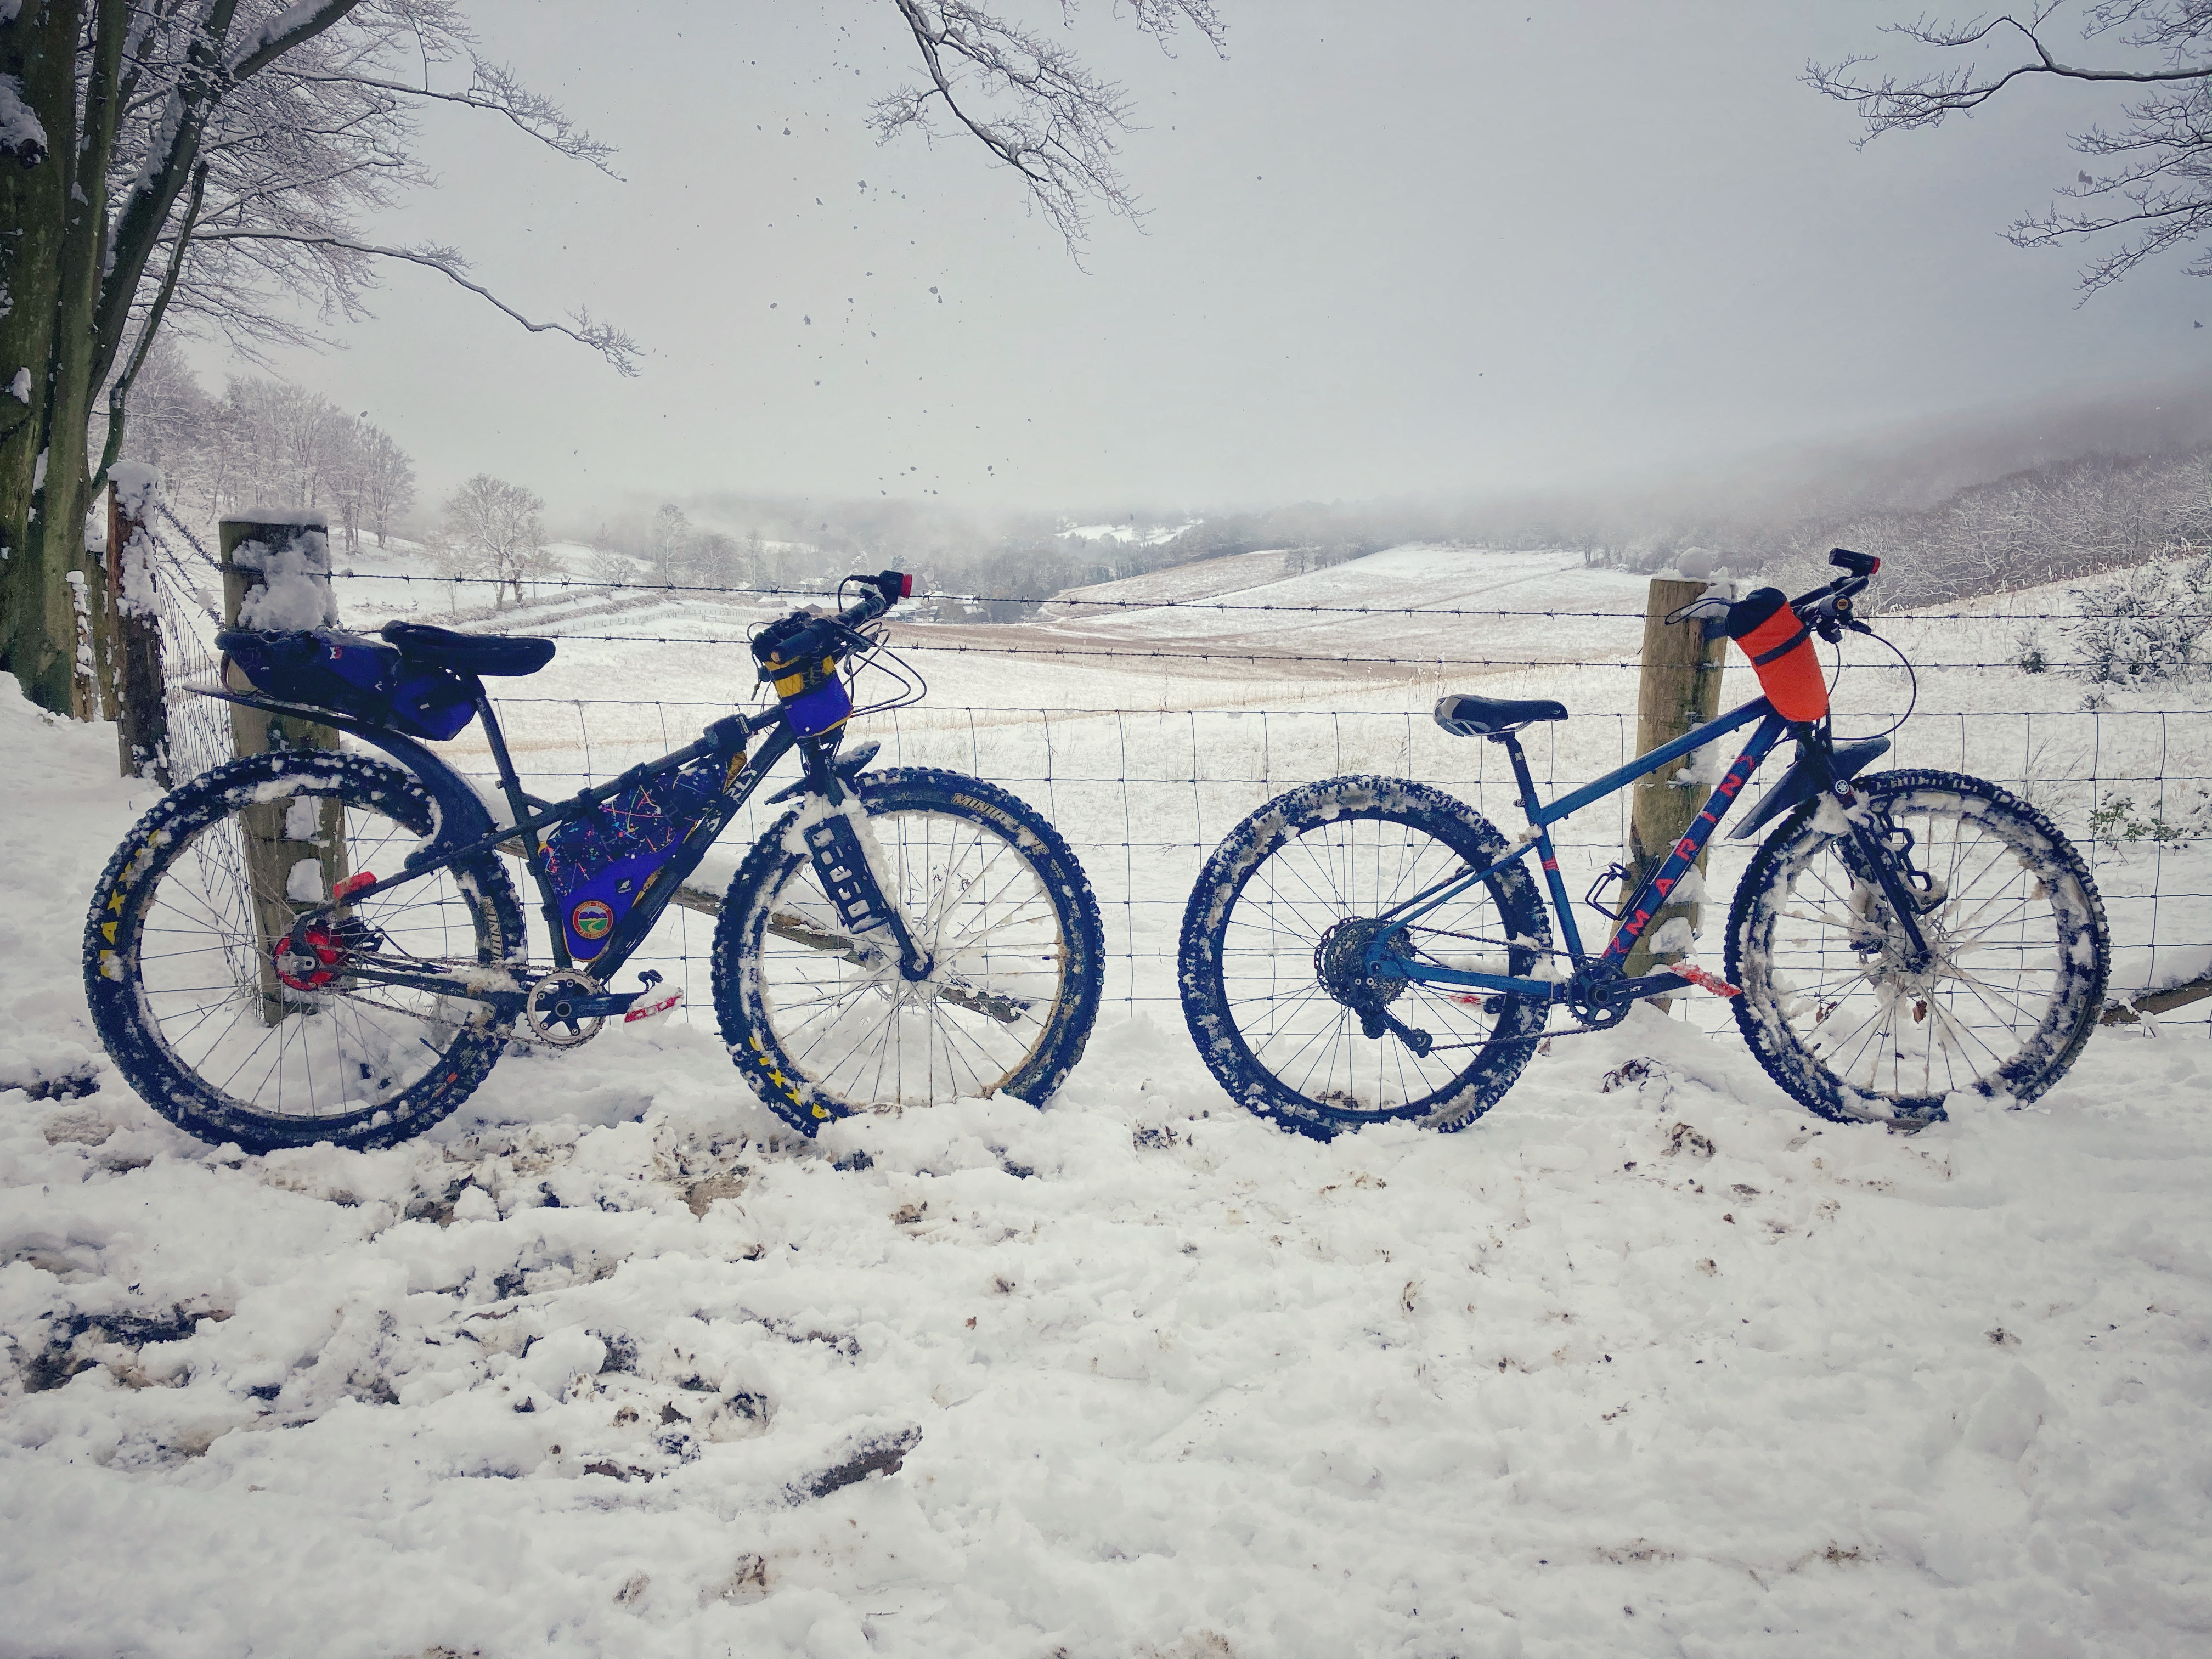 Mountain biking in snow and ice